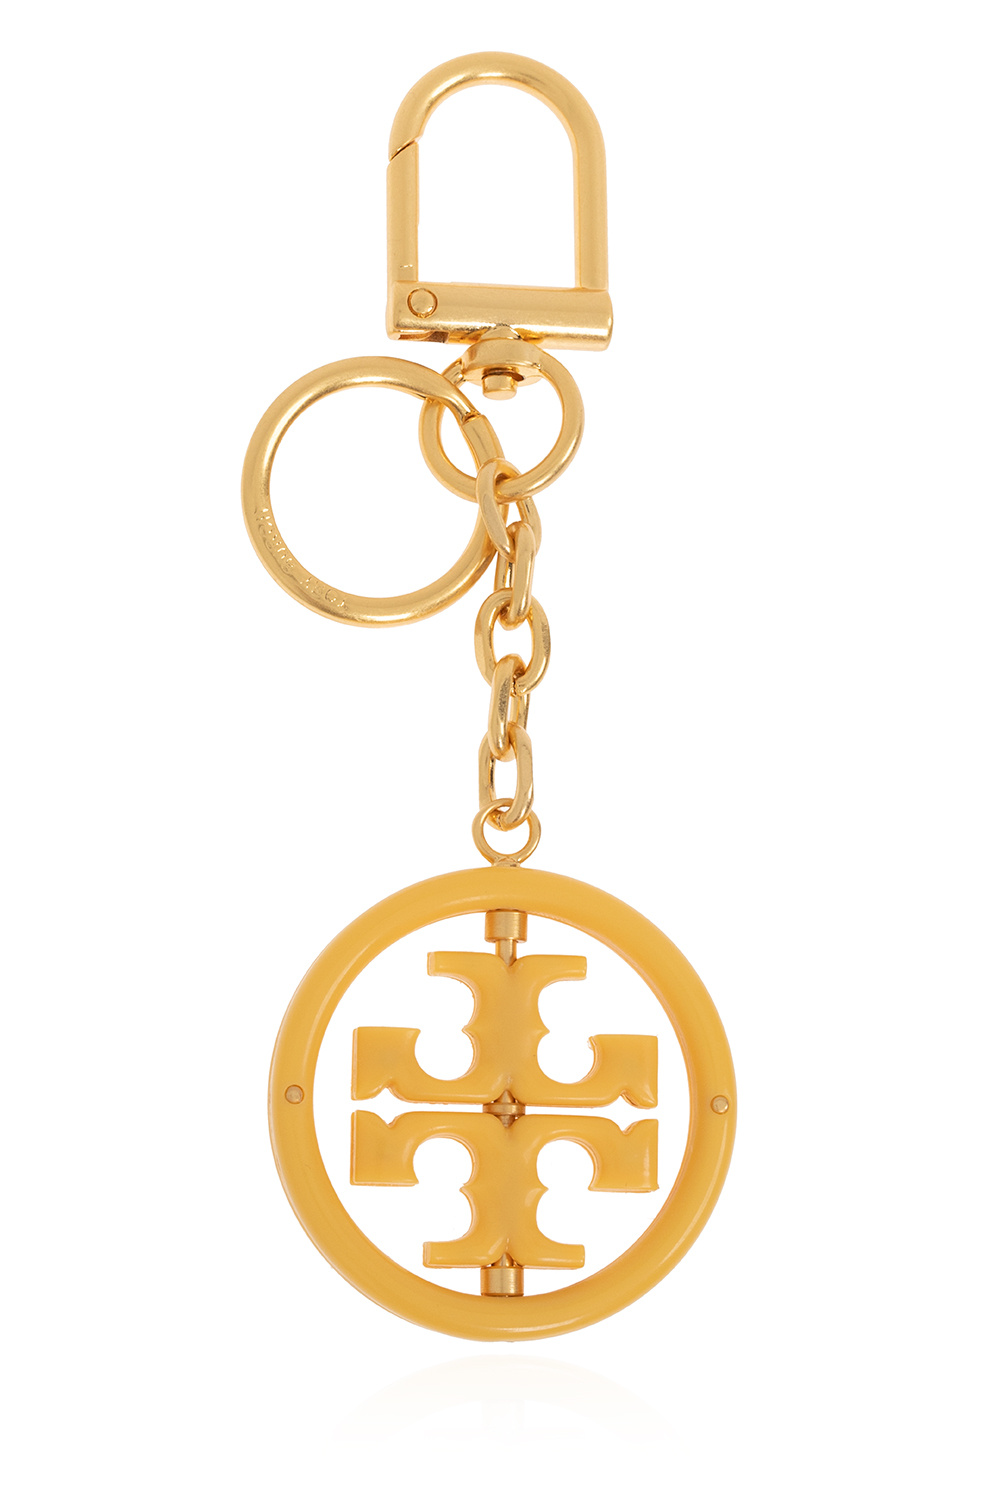 Tory Burch Keyring with rotating elements | Women's Accessories | Vitkac